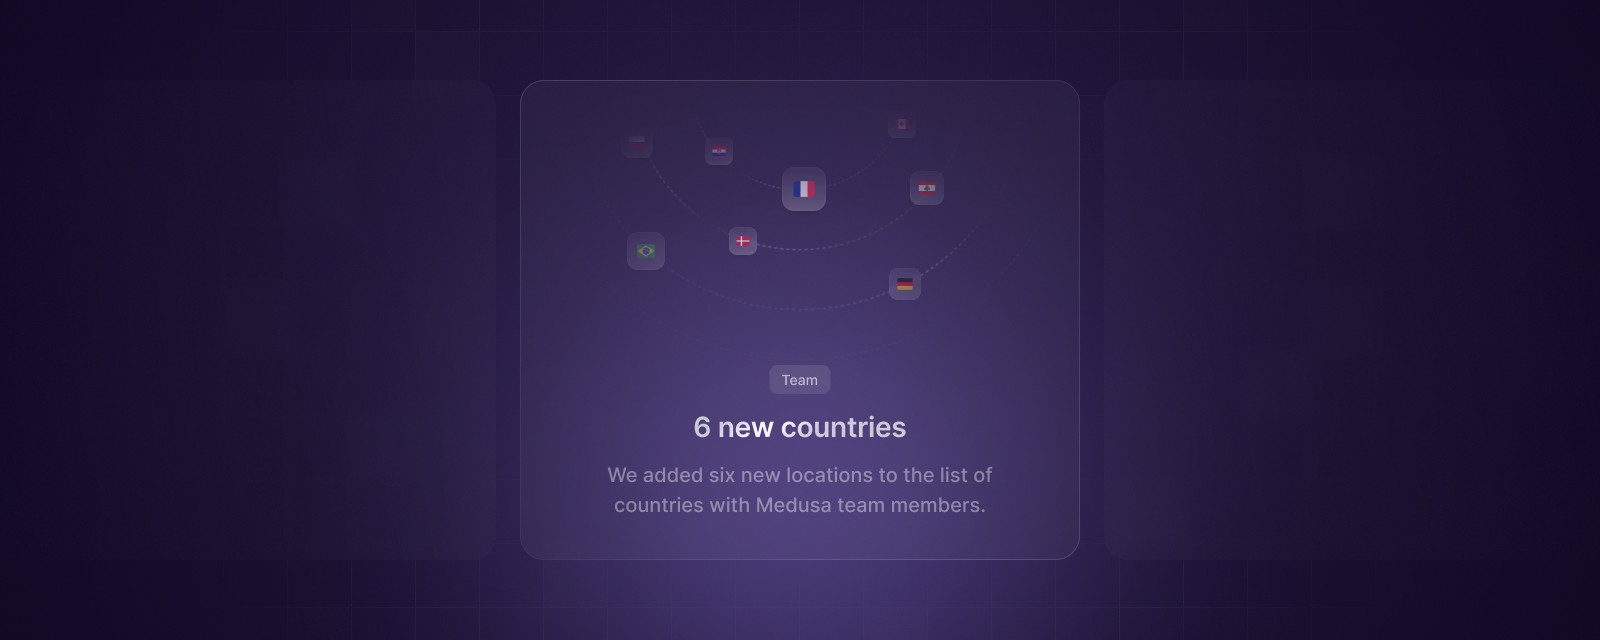 6 new countries
